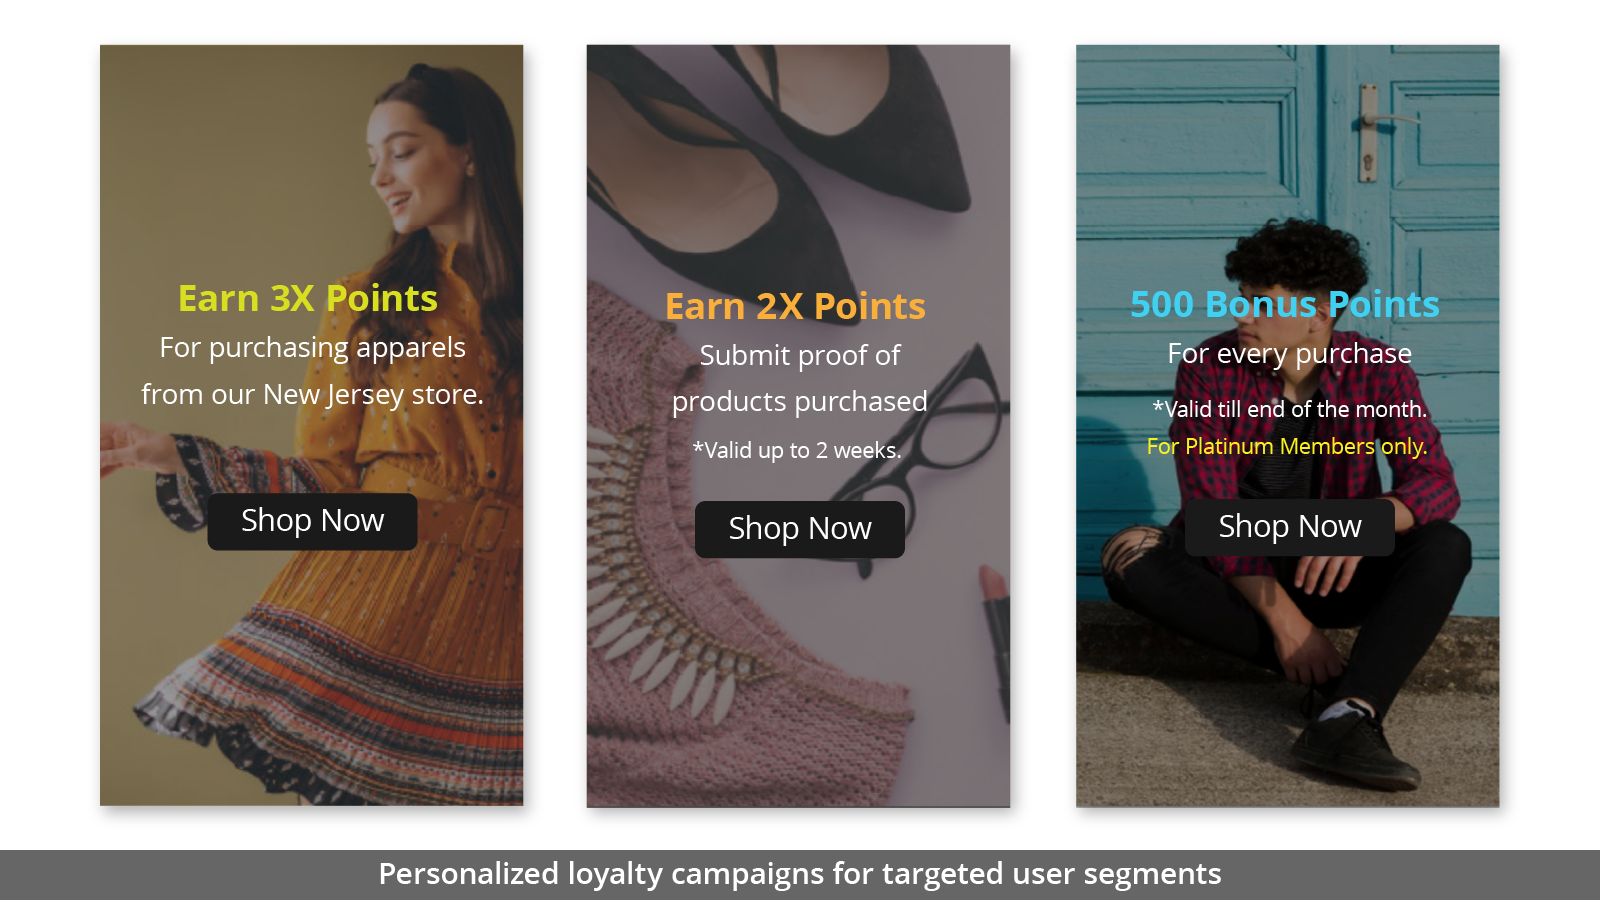 PERSONALIZED LOYALTY CAMPAIGNS FOR TARGETED USER SEGMENTS